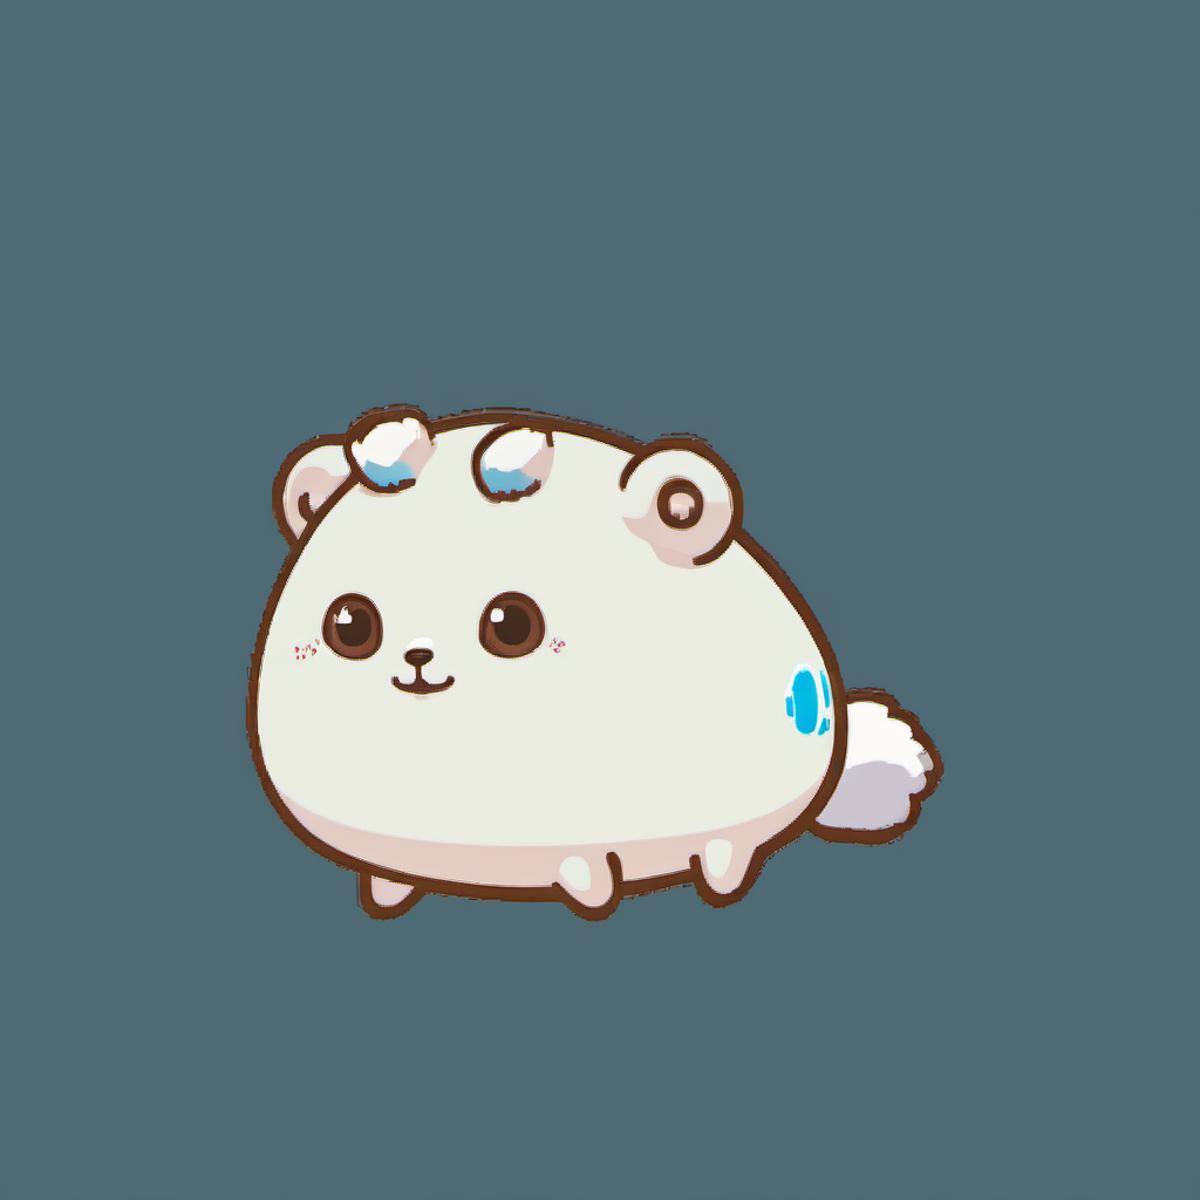 Axie Infinity XL image by mmmmrr